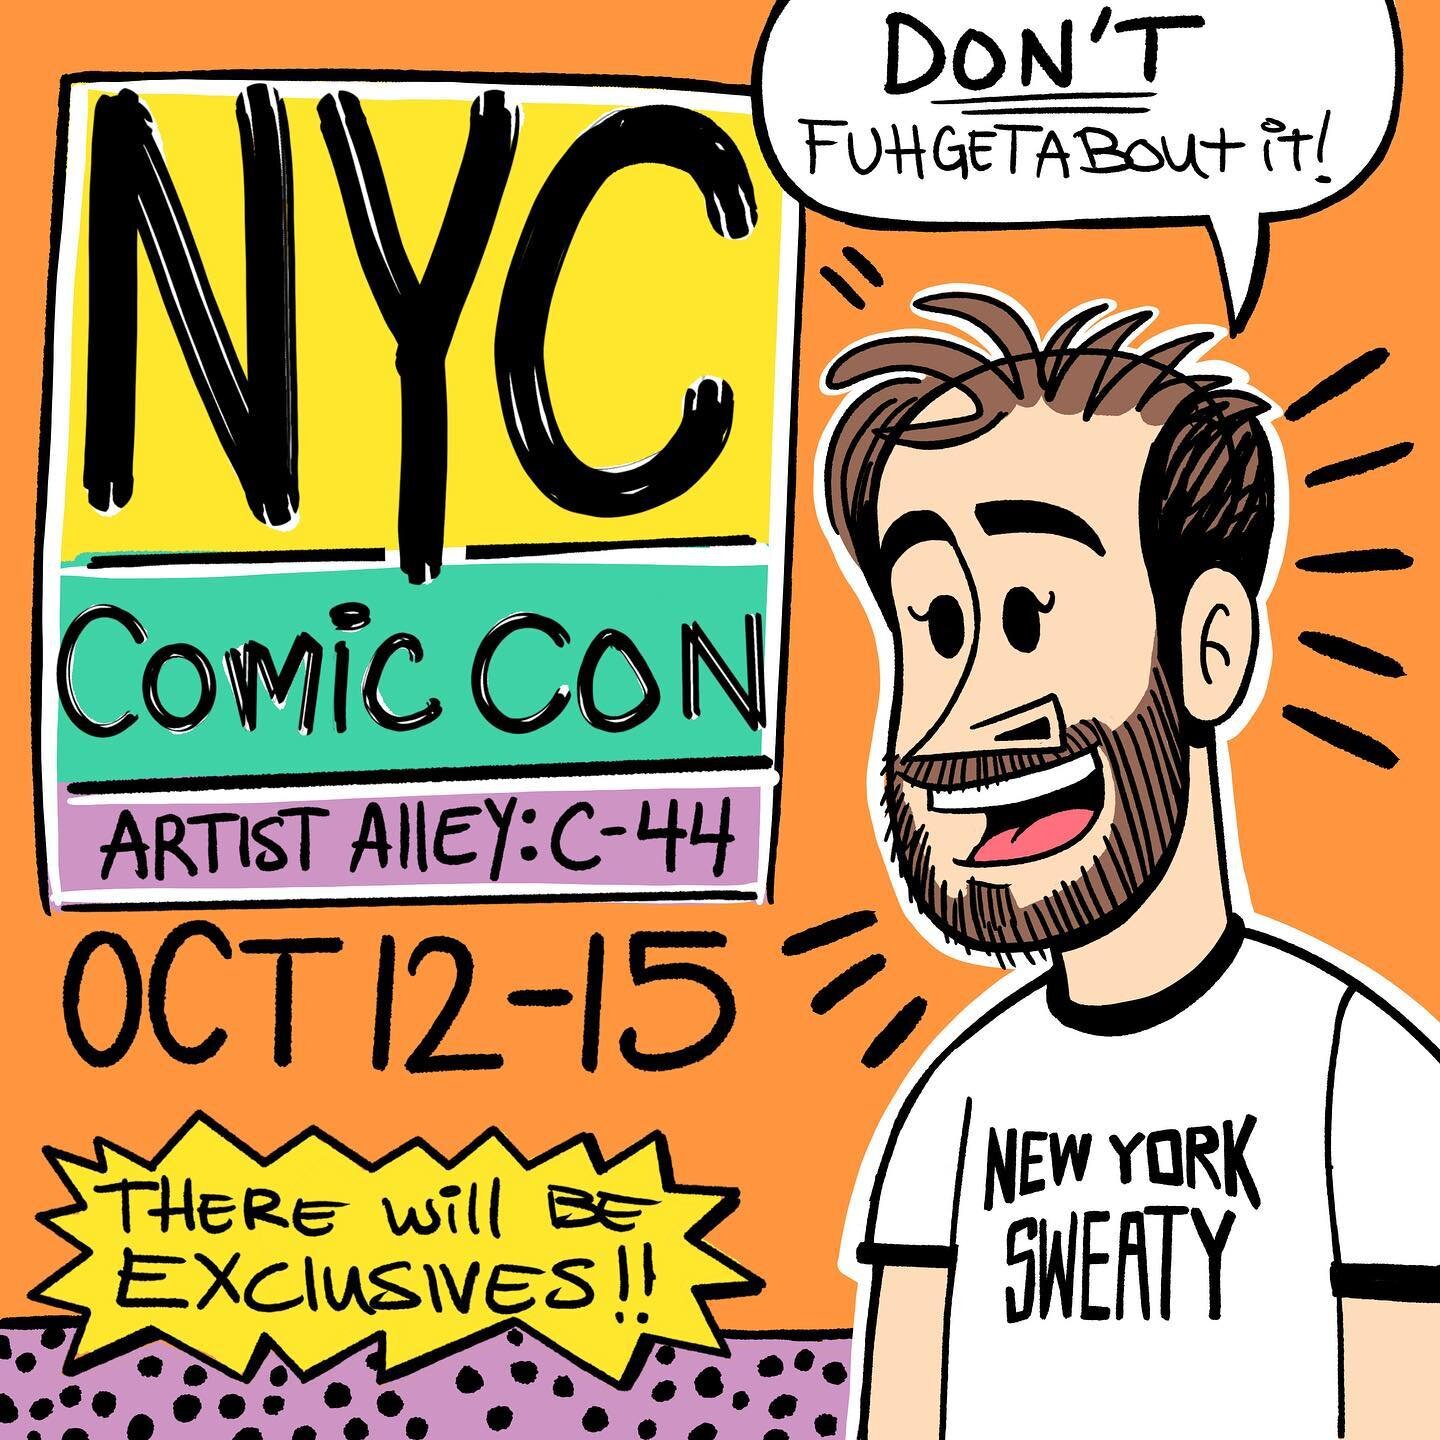 Come see me in Artists Alley next week at @newyorkcomiccon ! I will have a couple of EXCLUSIVES as well as books, prints, stickers and the like. As always, my neighbor will be @hannahhillam because we are attached at the hip.

Also you can get that N